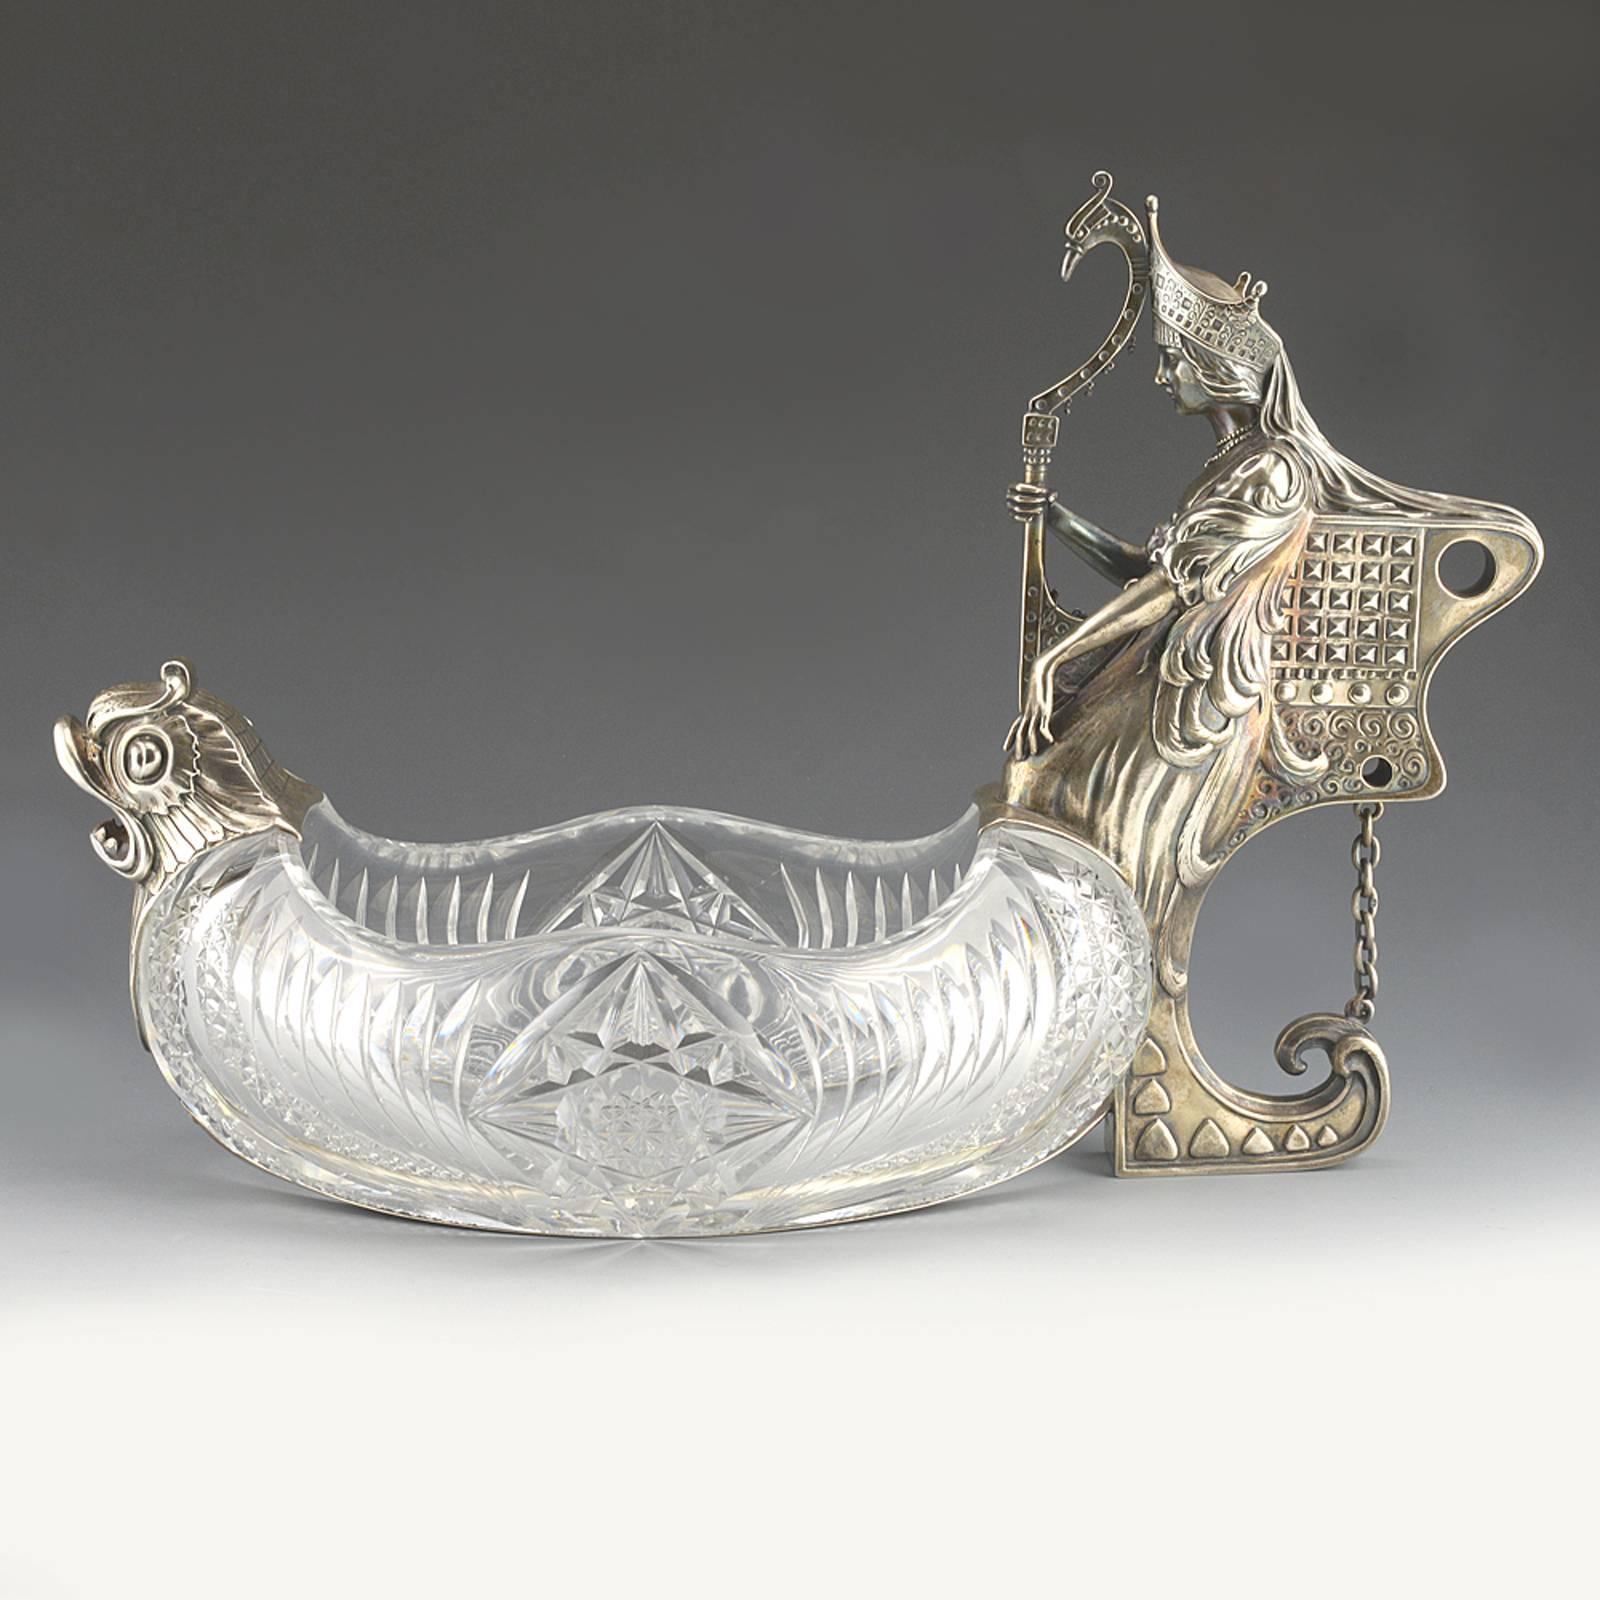 A large silver-mounted cut-glass kovsh form centerpiece, Khlebnikov, Moscow, 1908-1917. The handle cast and chased as a Swan Maiden in the clothing of a Boyarina in Kokoshnik, holding her swan-headed harp in one hand and with feathers from her